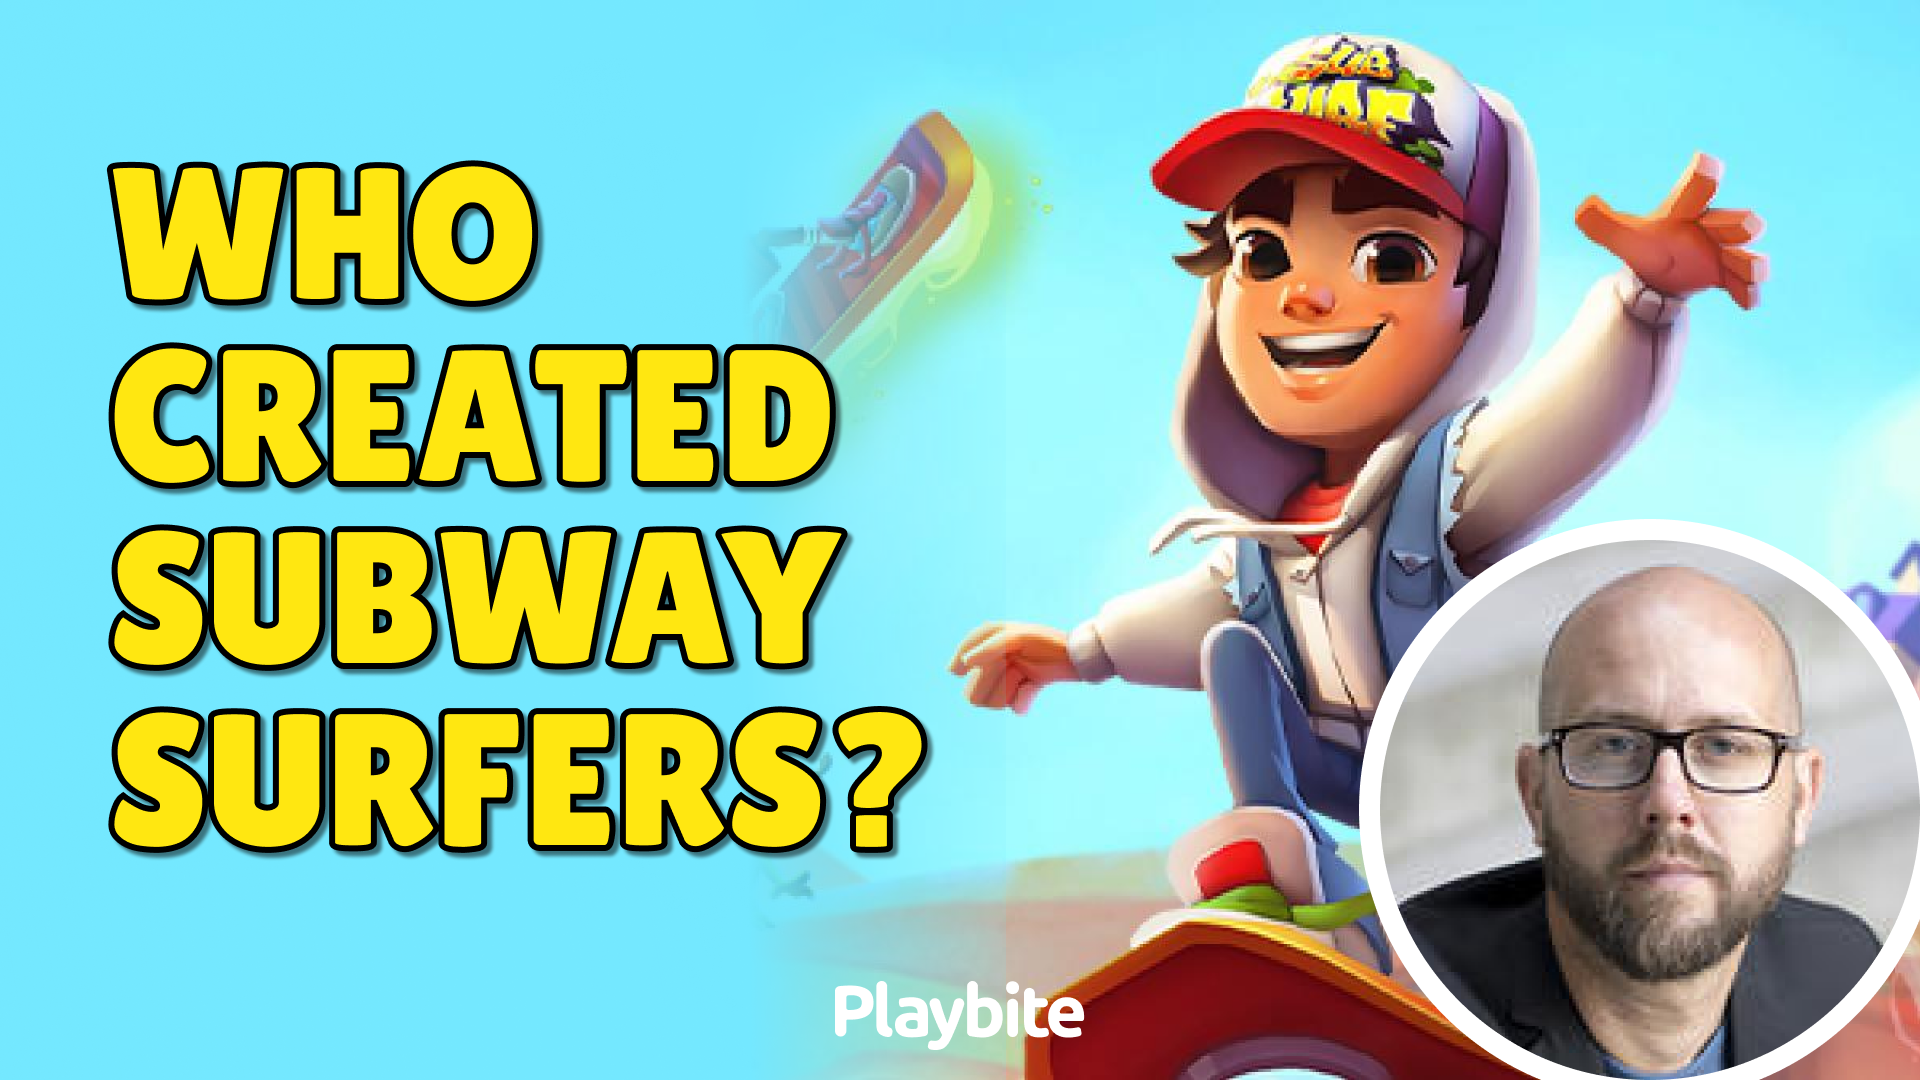 Former Co-Developer Of Subway Surfers Shutting Down, Facing Total